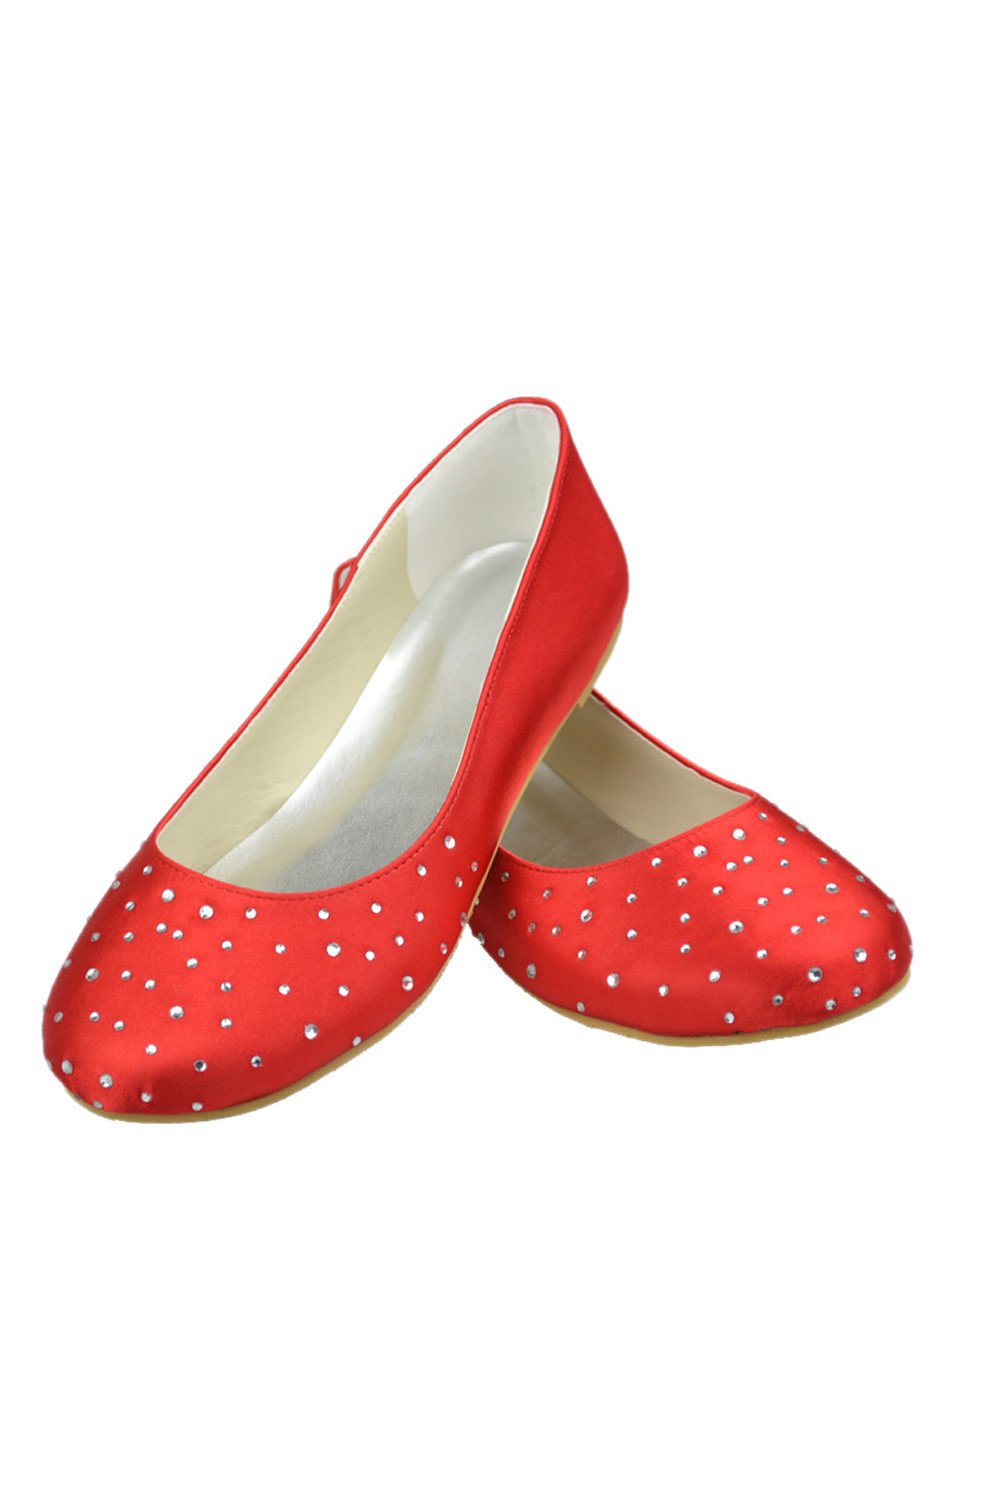 Hand Made Close Toe Flats Wedding Party Shoes L-030